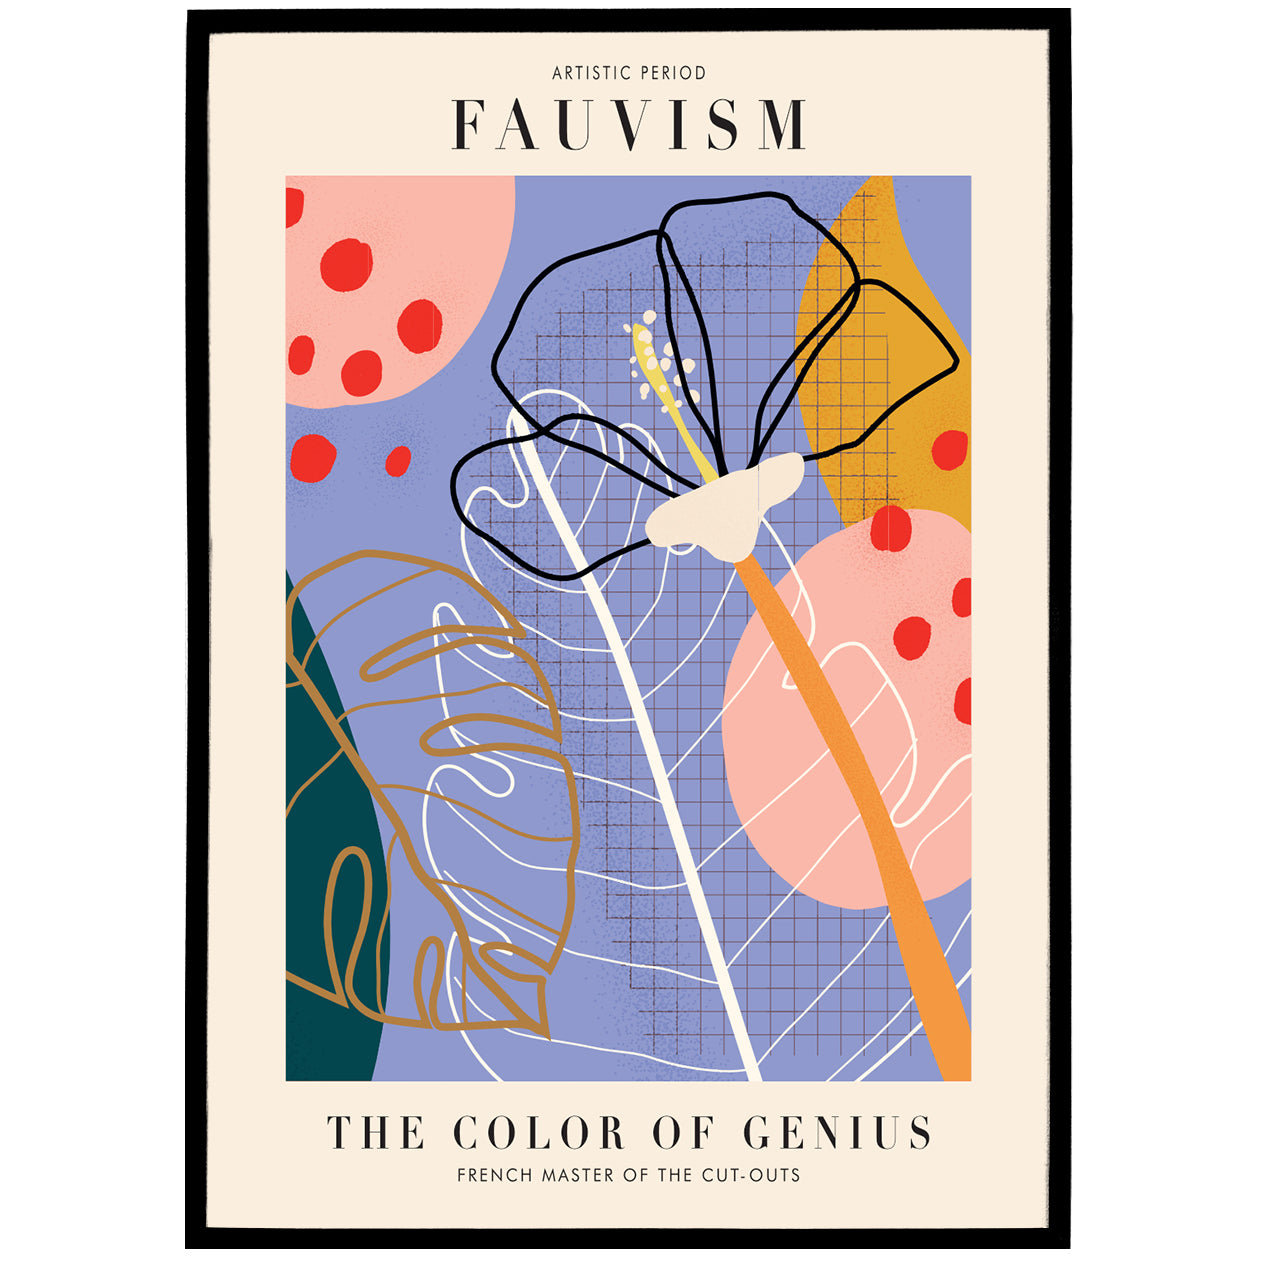 Fauvism Exhibition Poster